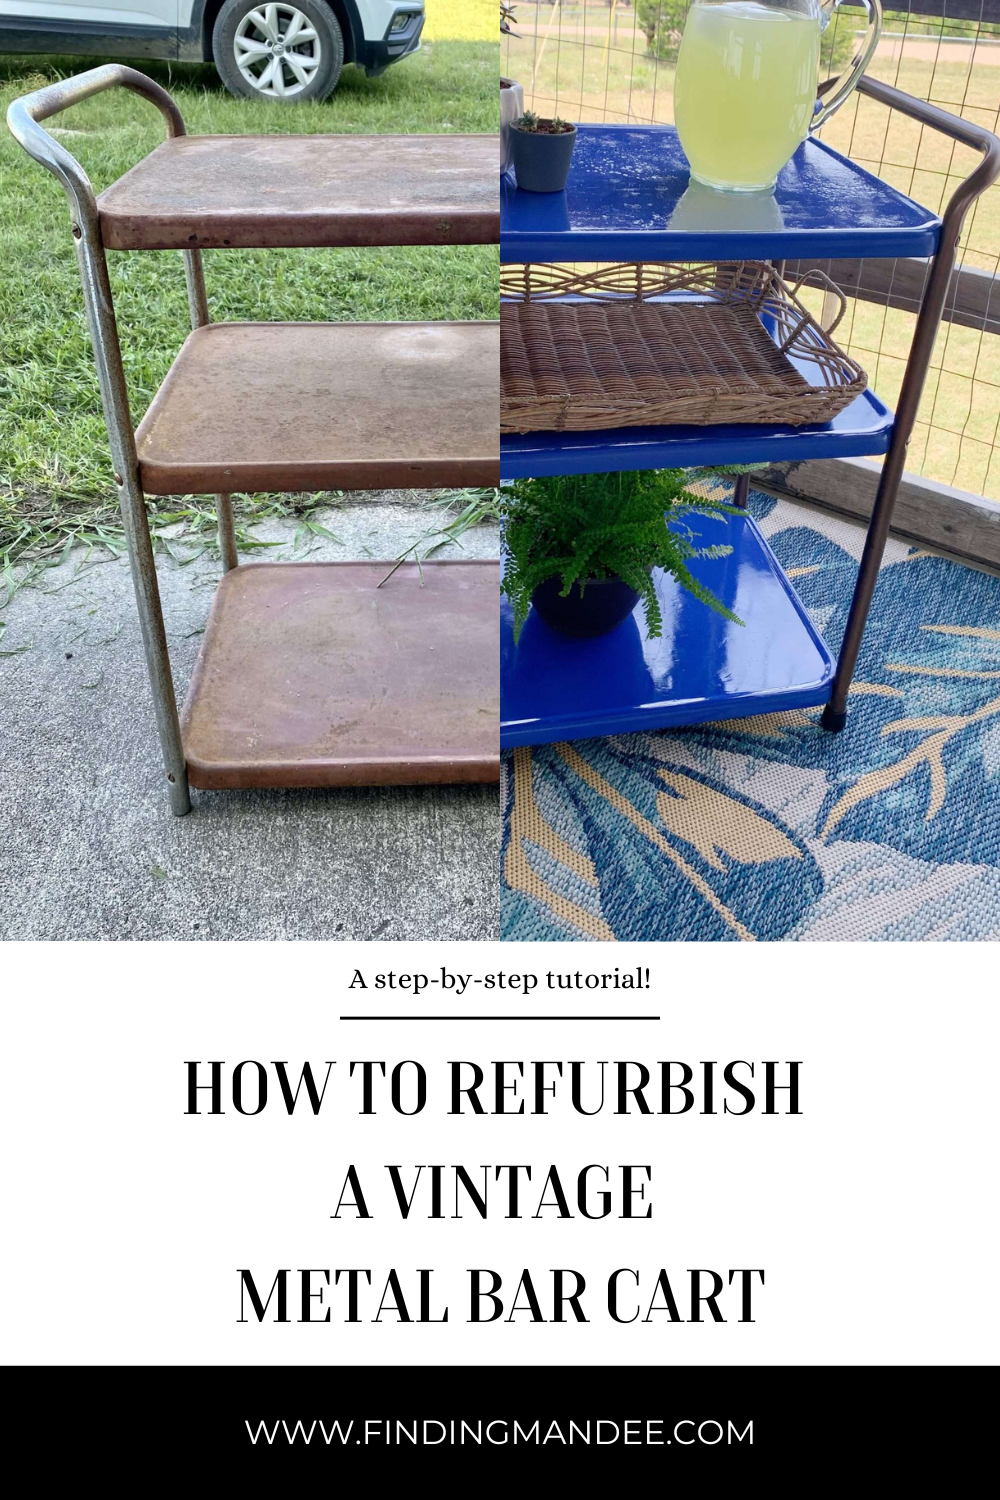 How to Refurbish a Vintage Metal Bar Cart: A Step-By-Step Tutorial | Finding Mandee